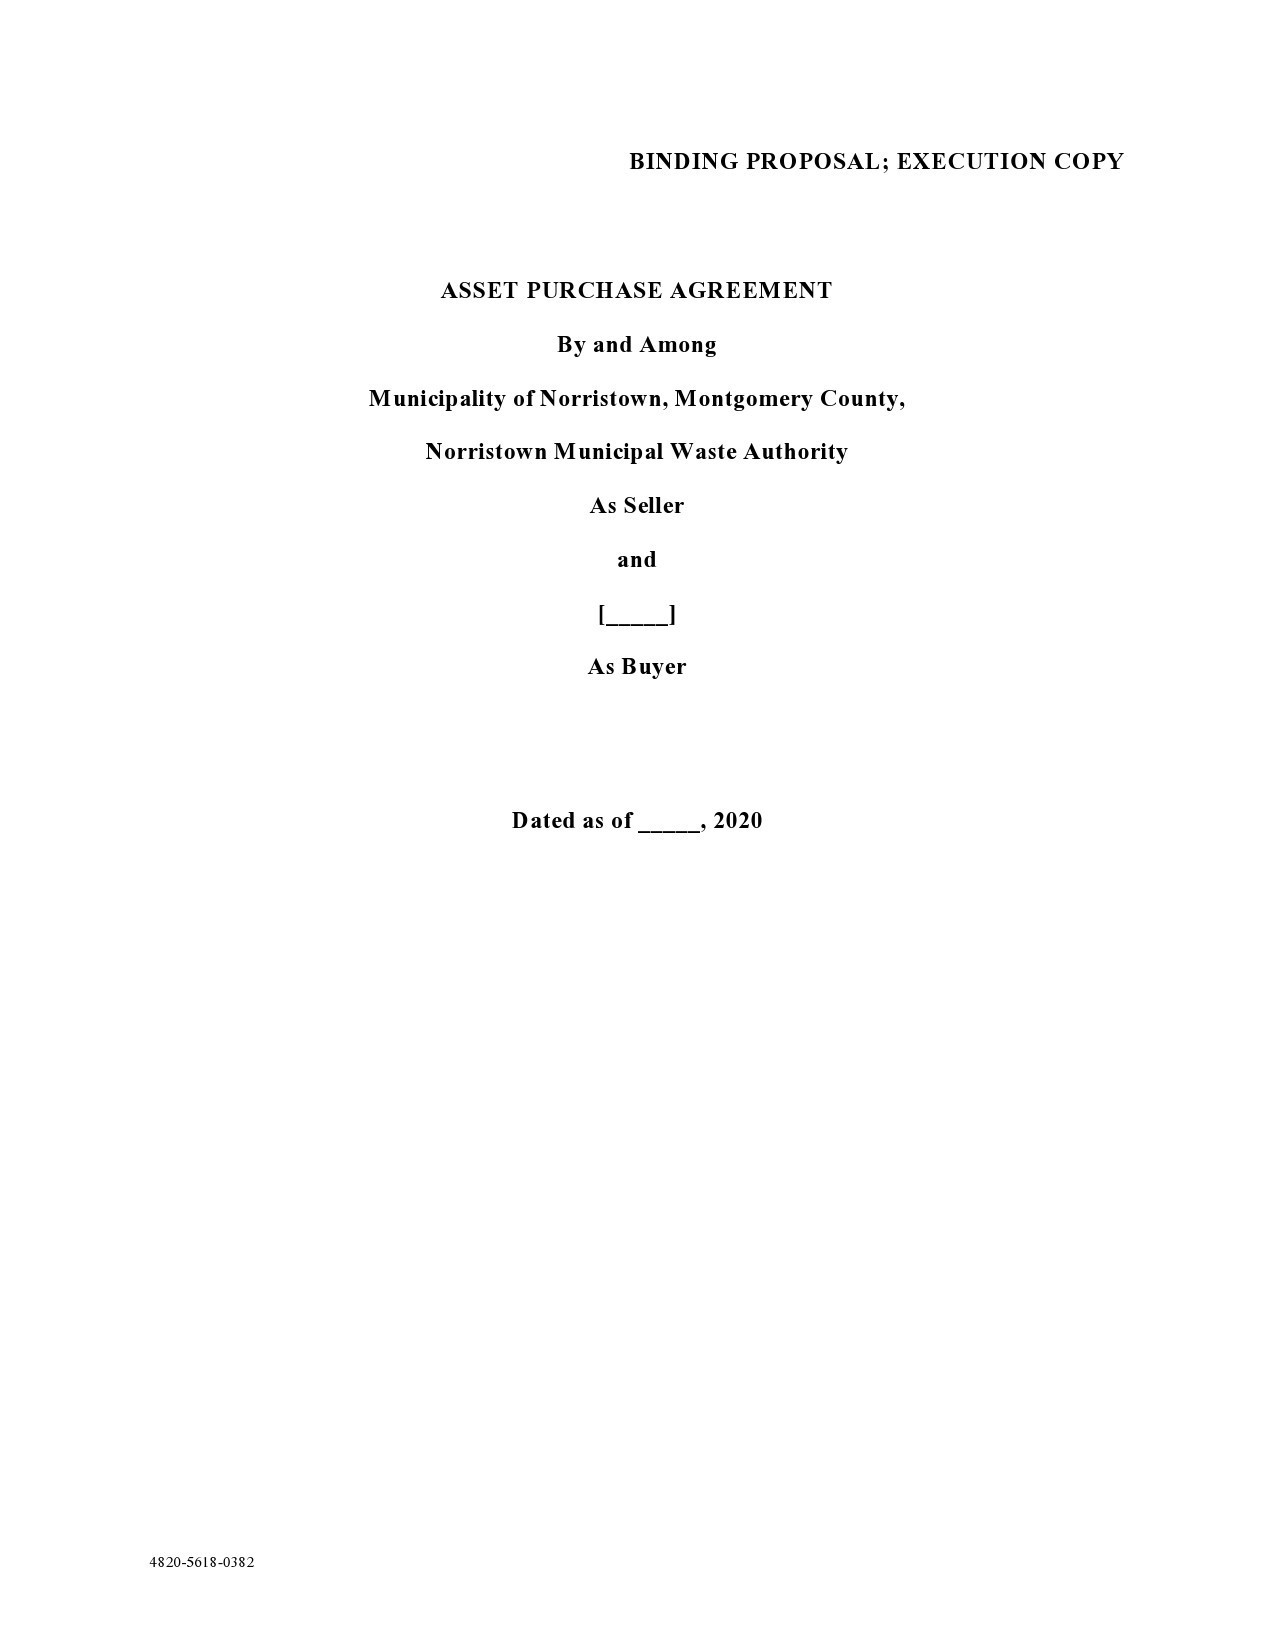 Free asset purchase agreement 25